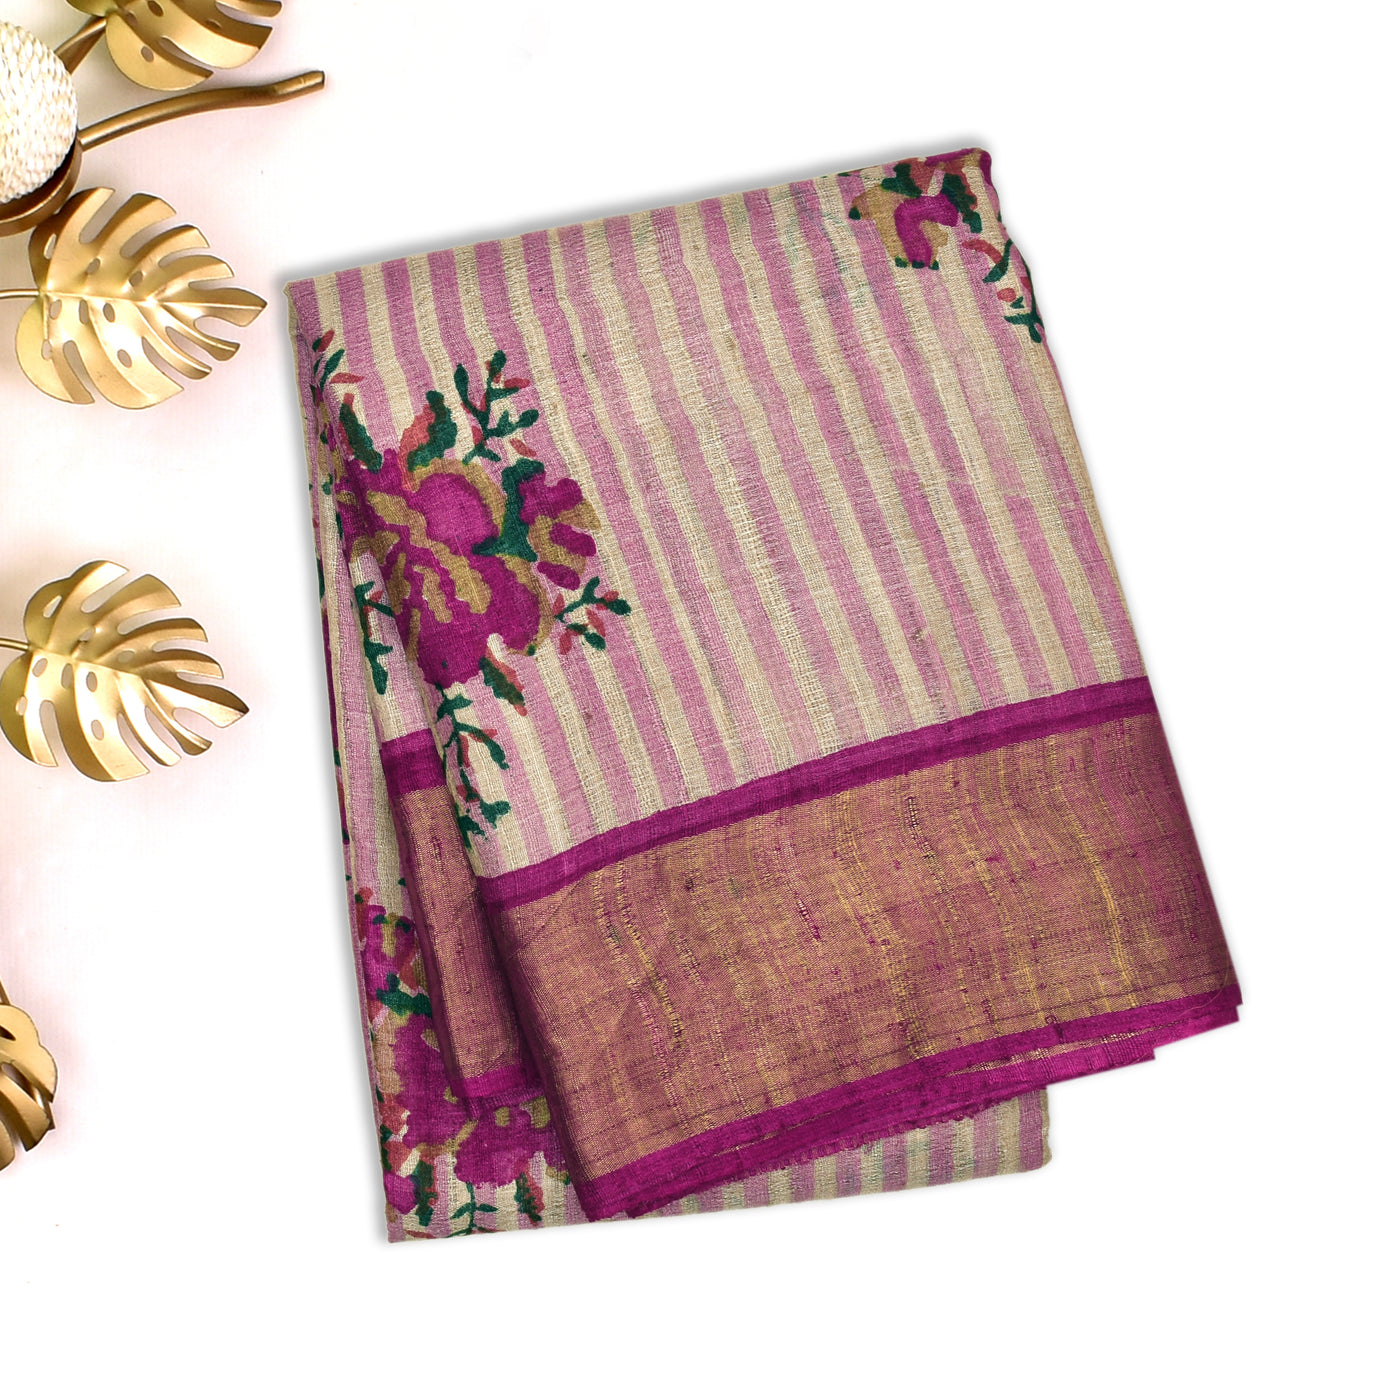 Off White Tussar Silk Saree with Stripes and Floral Printed Design